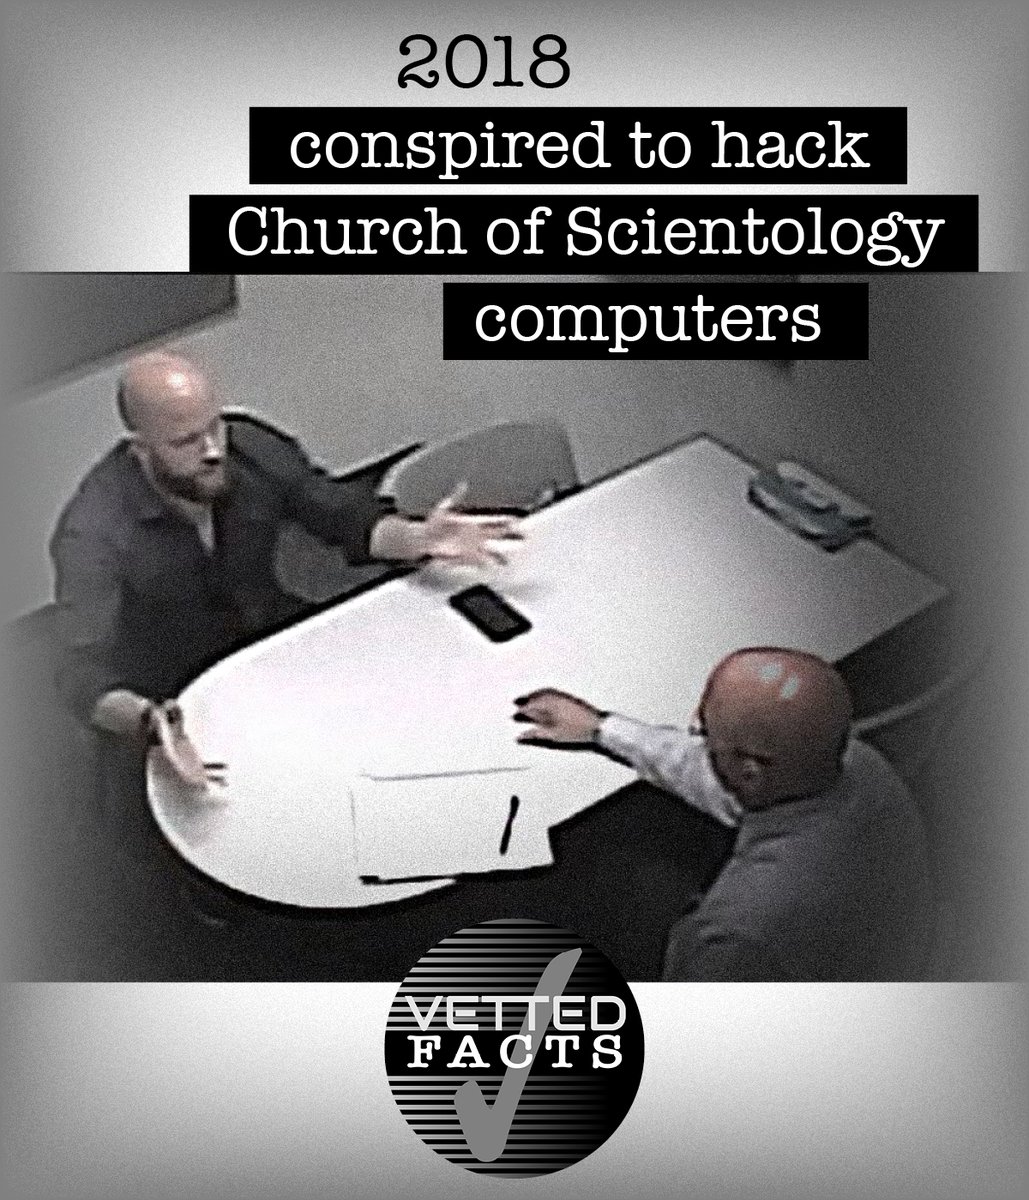 In 2018, Aaron Smith-Levin conspired to hack Church of Scientology computers to steal information. “I thought: this sounds like something that could actually work,” Smith-Levin told law enforcement about his failed plan. @growingupinscn